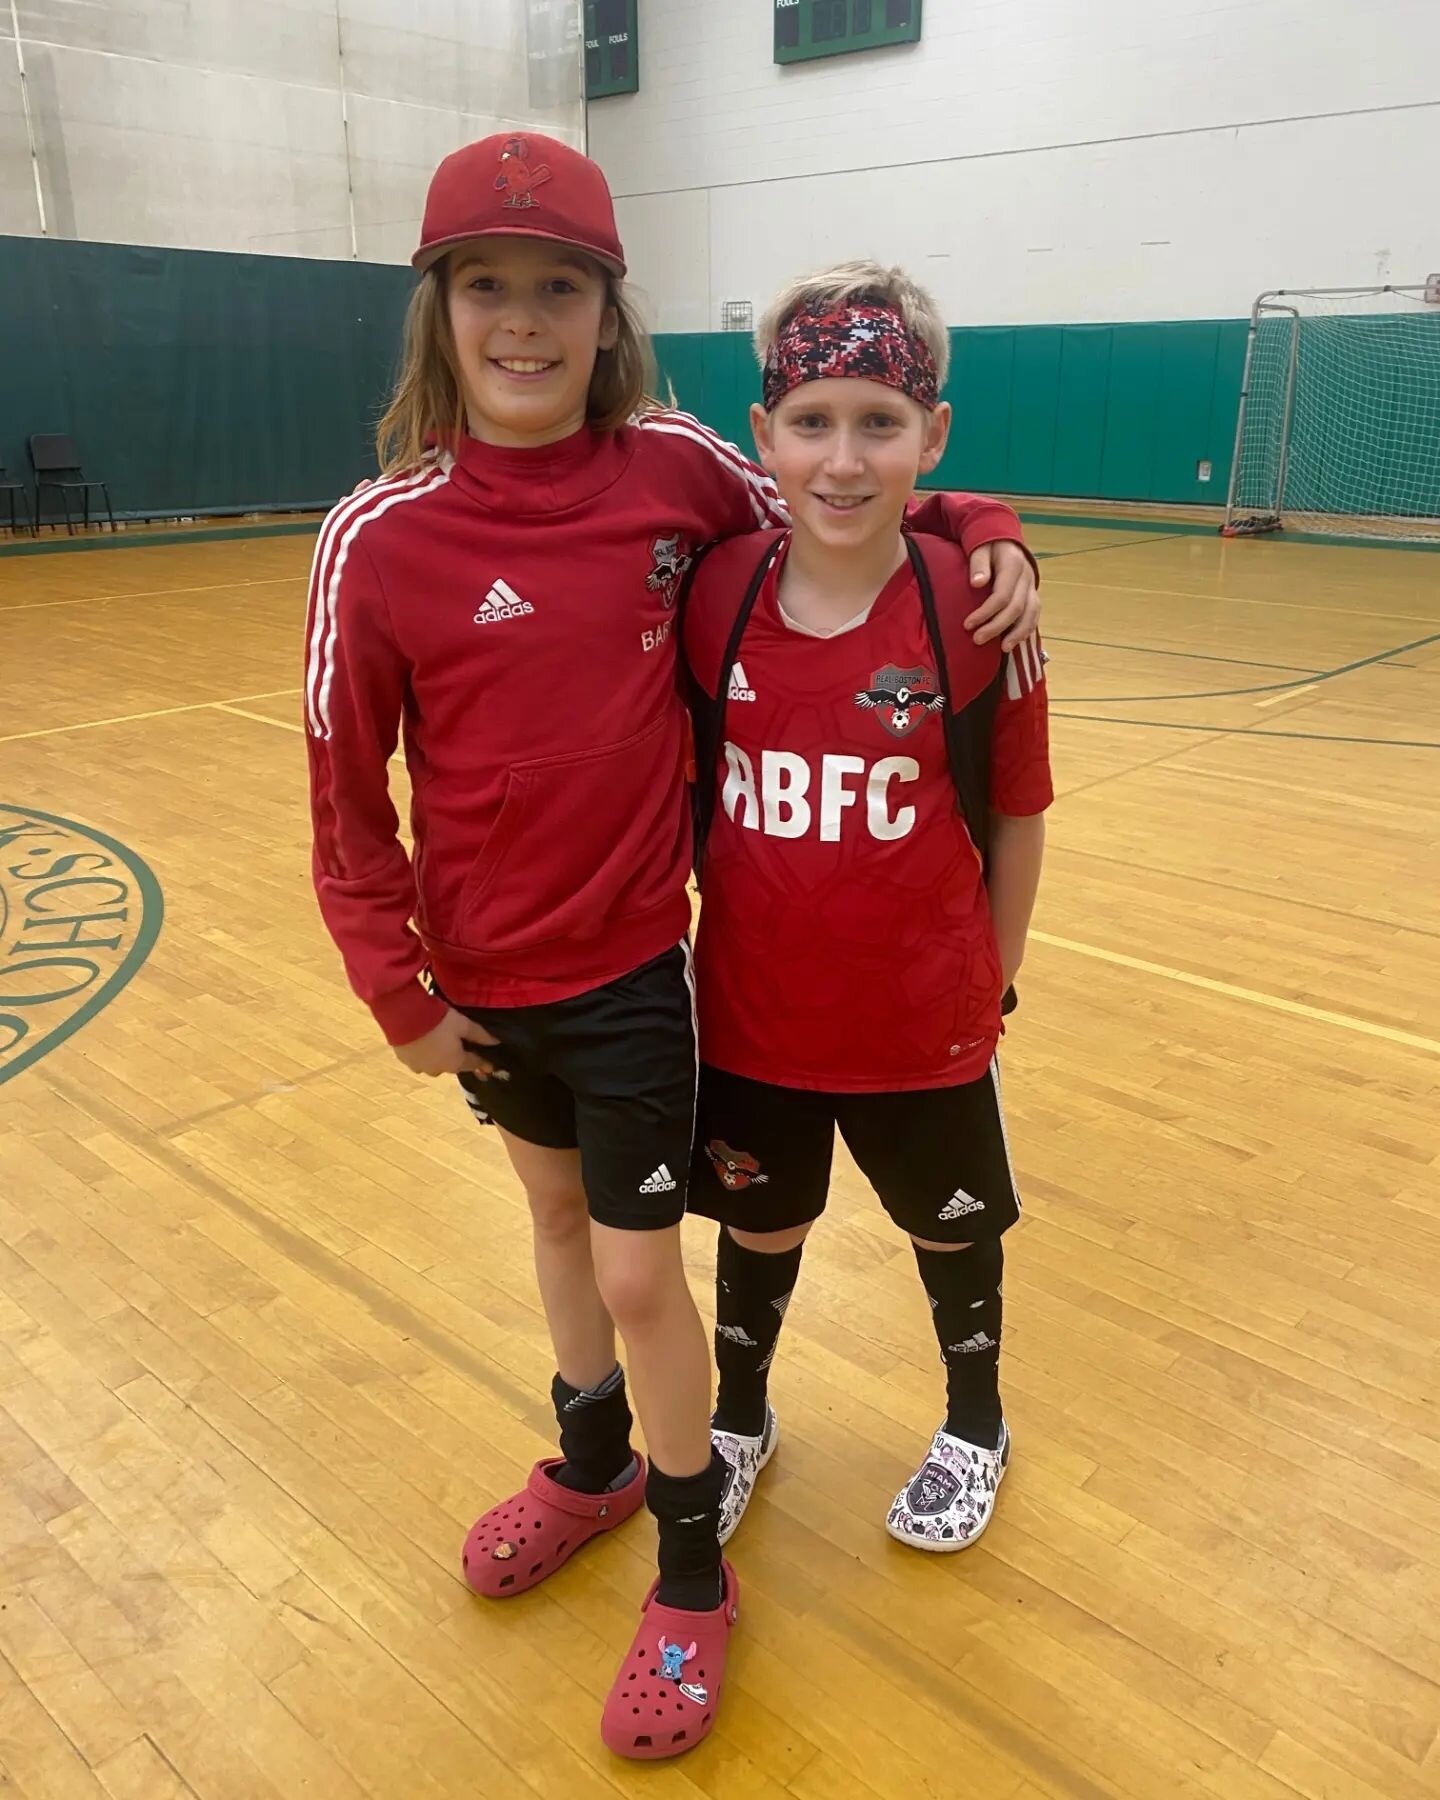 &quot;The secret to success is to never let down and never let up.&rdquo; &ndash; Larry Bird

Join RBFC for our futsal skills clinic begging 2/8 at @fhsudbury. This is the perfect opportunity for players to hone their skills or try futsal for the fir